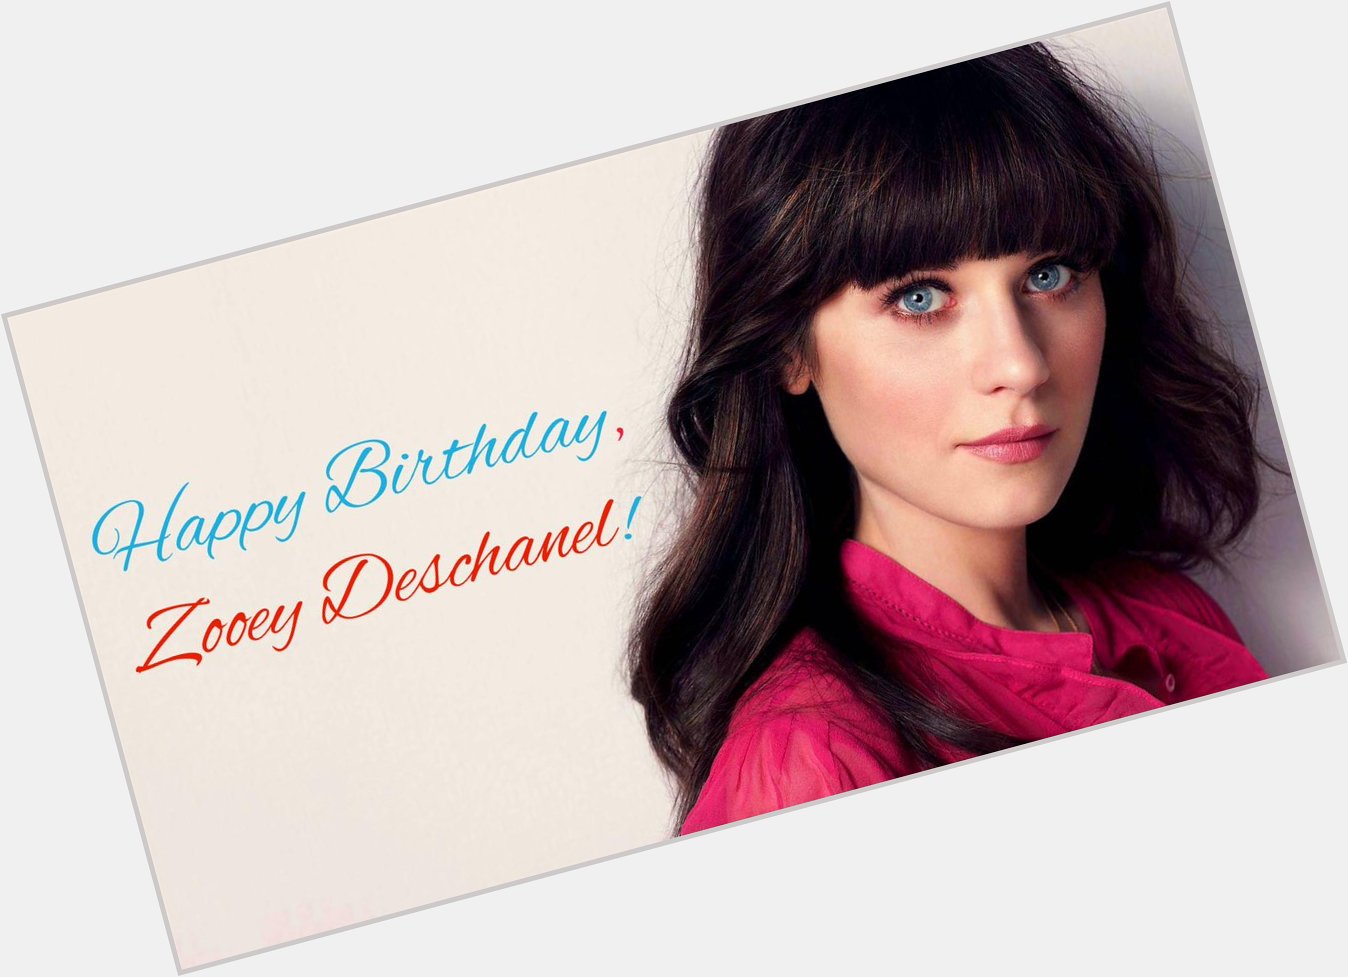 Happy birthday to our favorite New Girl, Zooey Deschanel! Watch her in Polliwood to celebrate!  